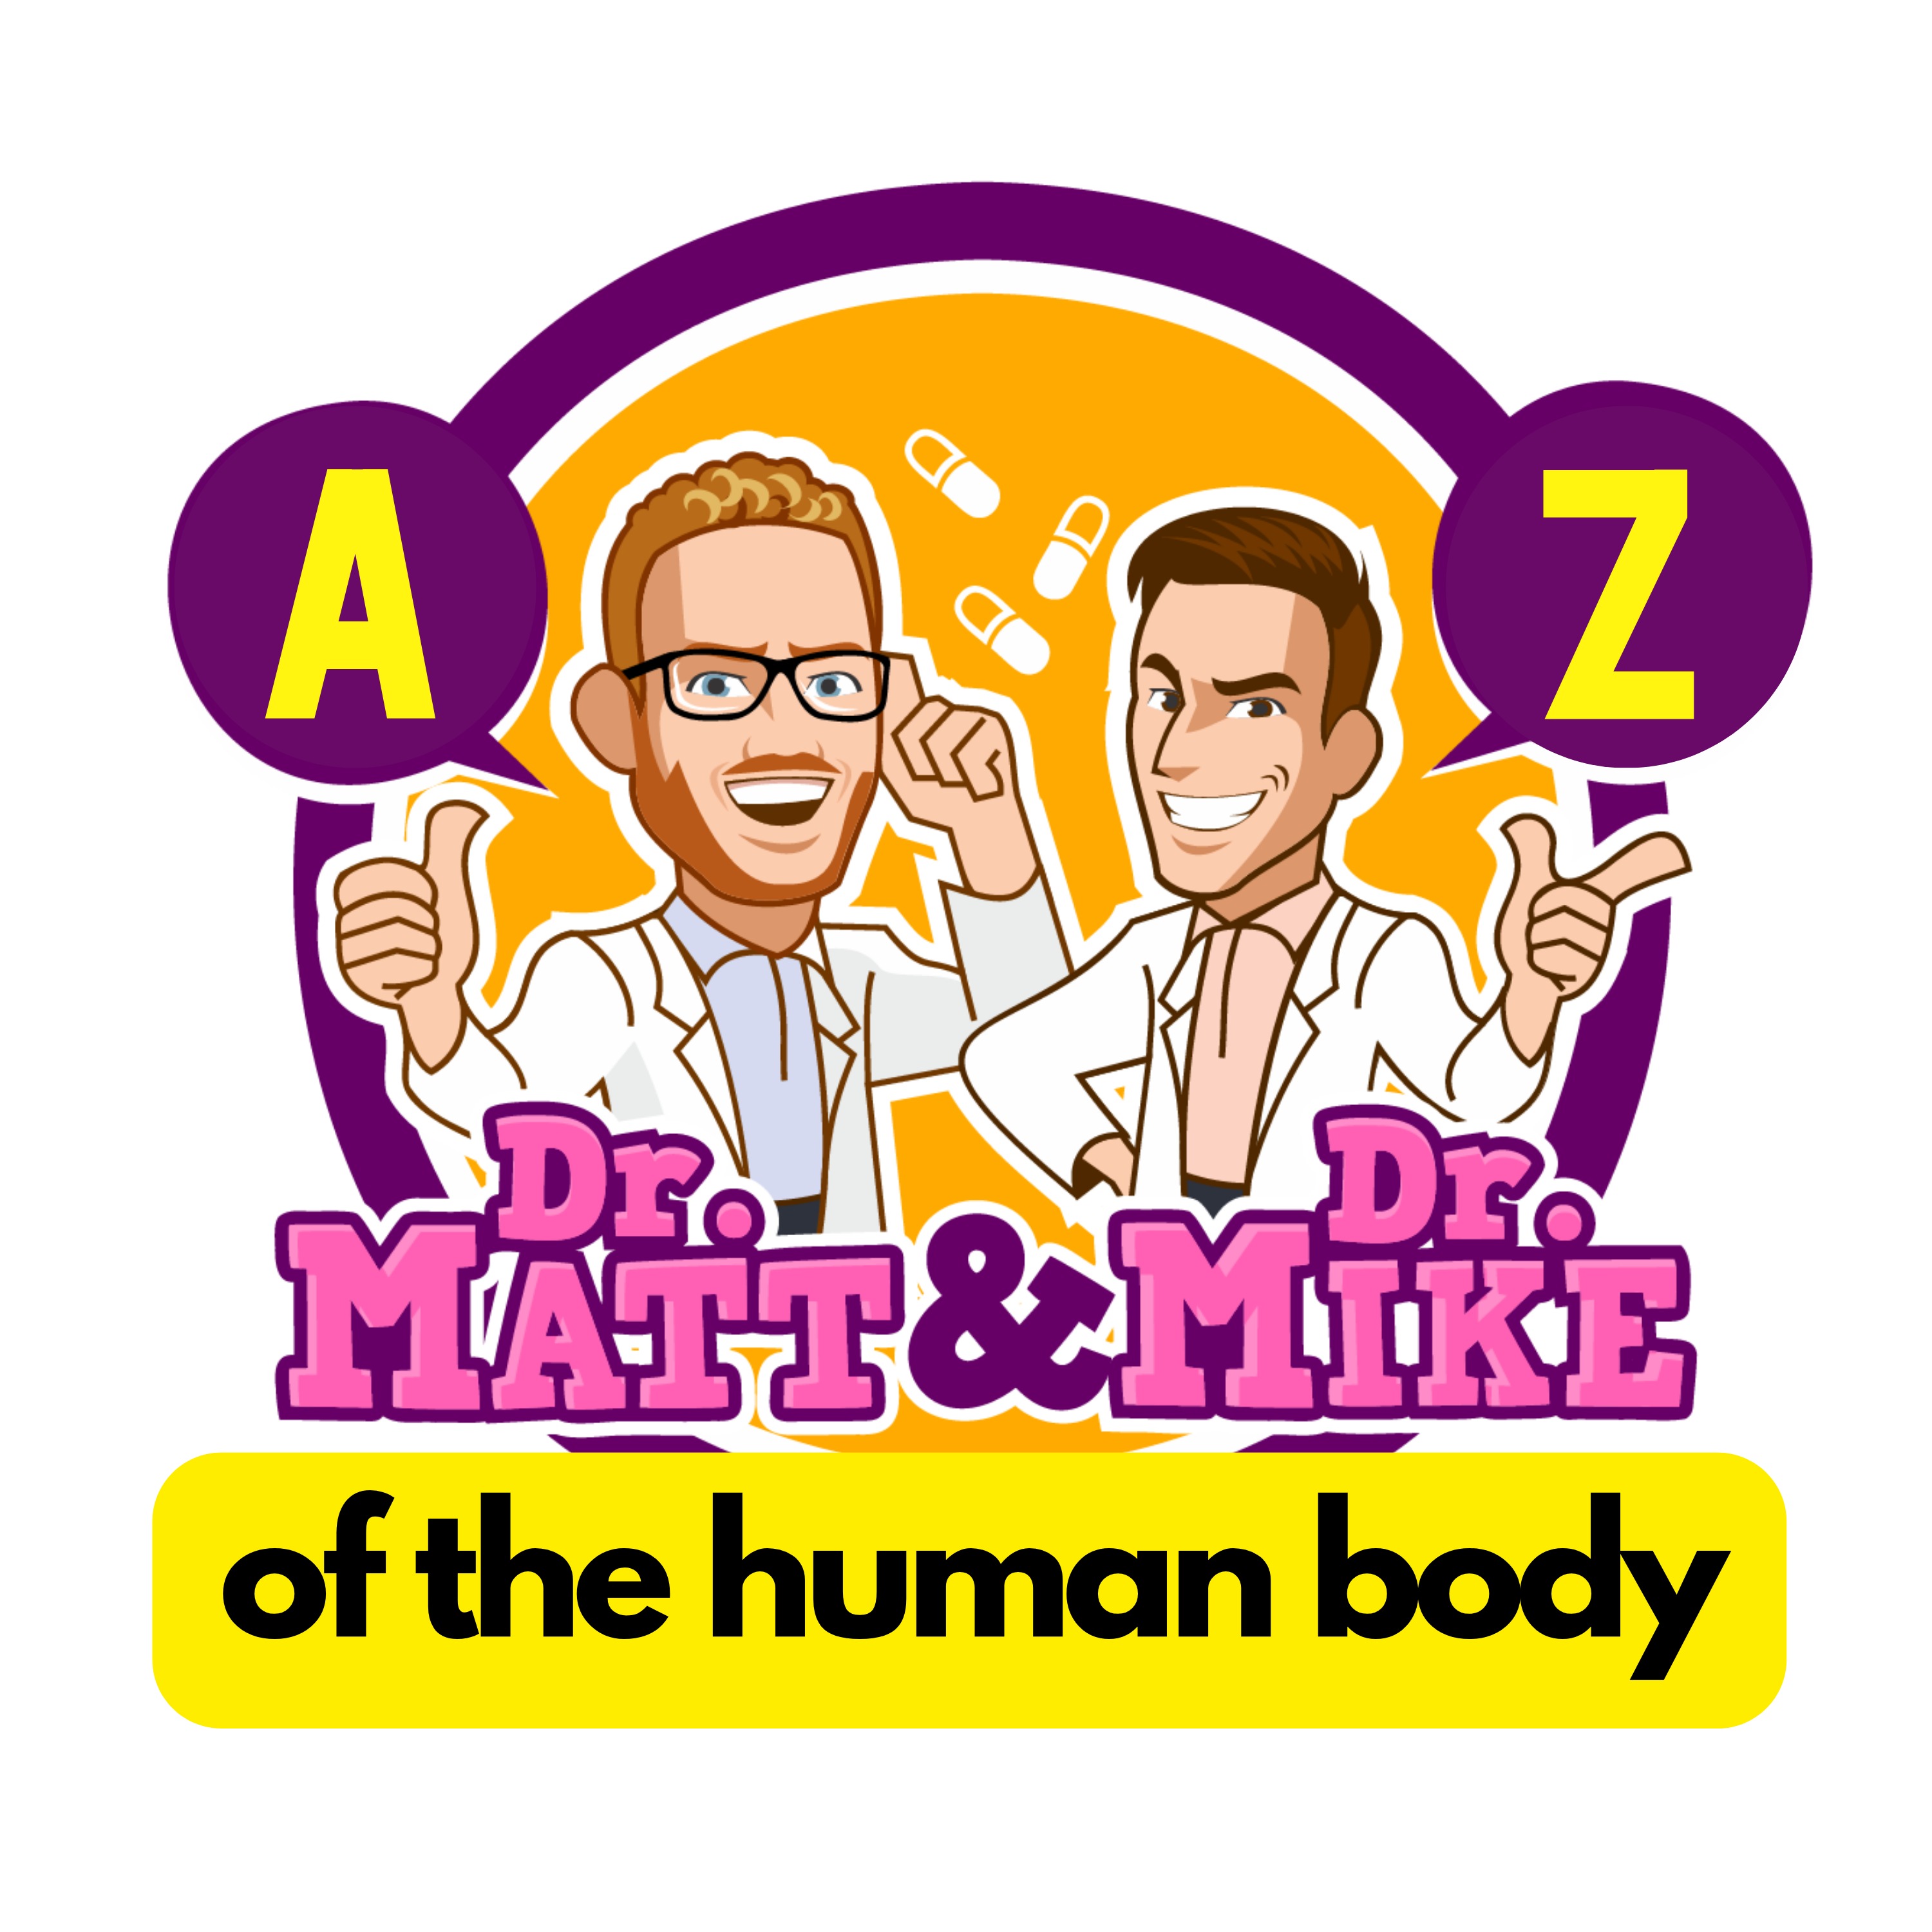 Albumin | A-Z of the Human Body